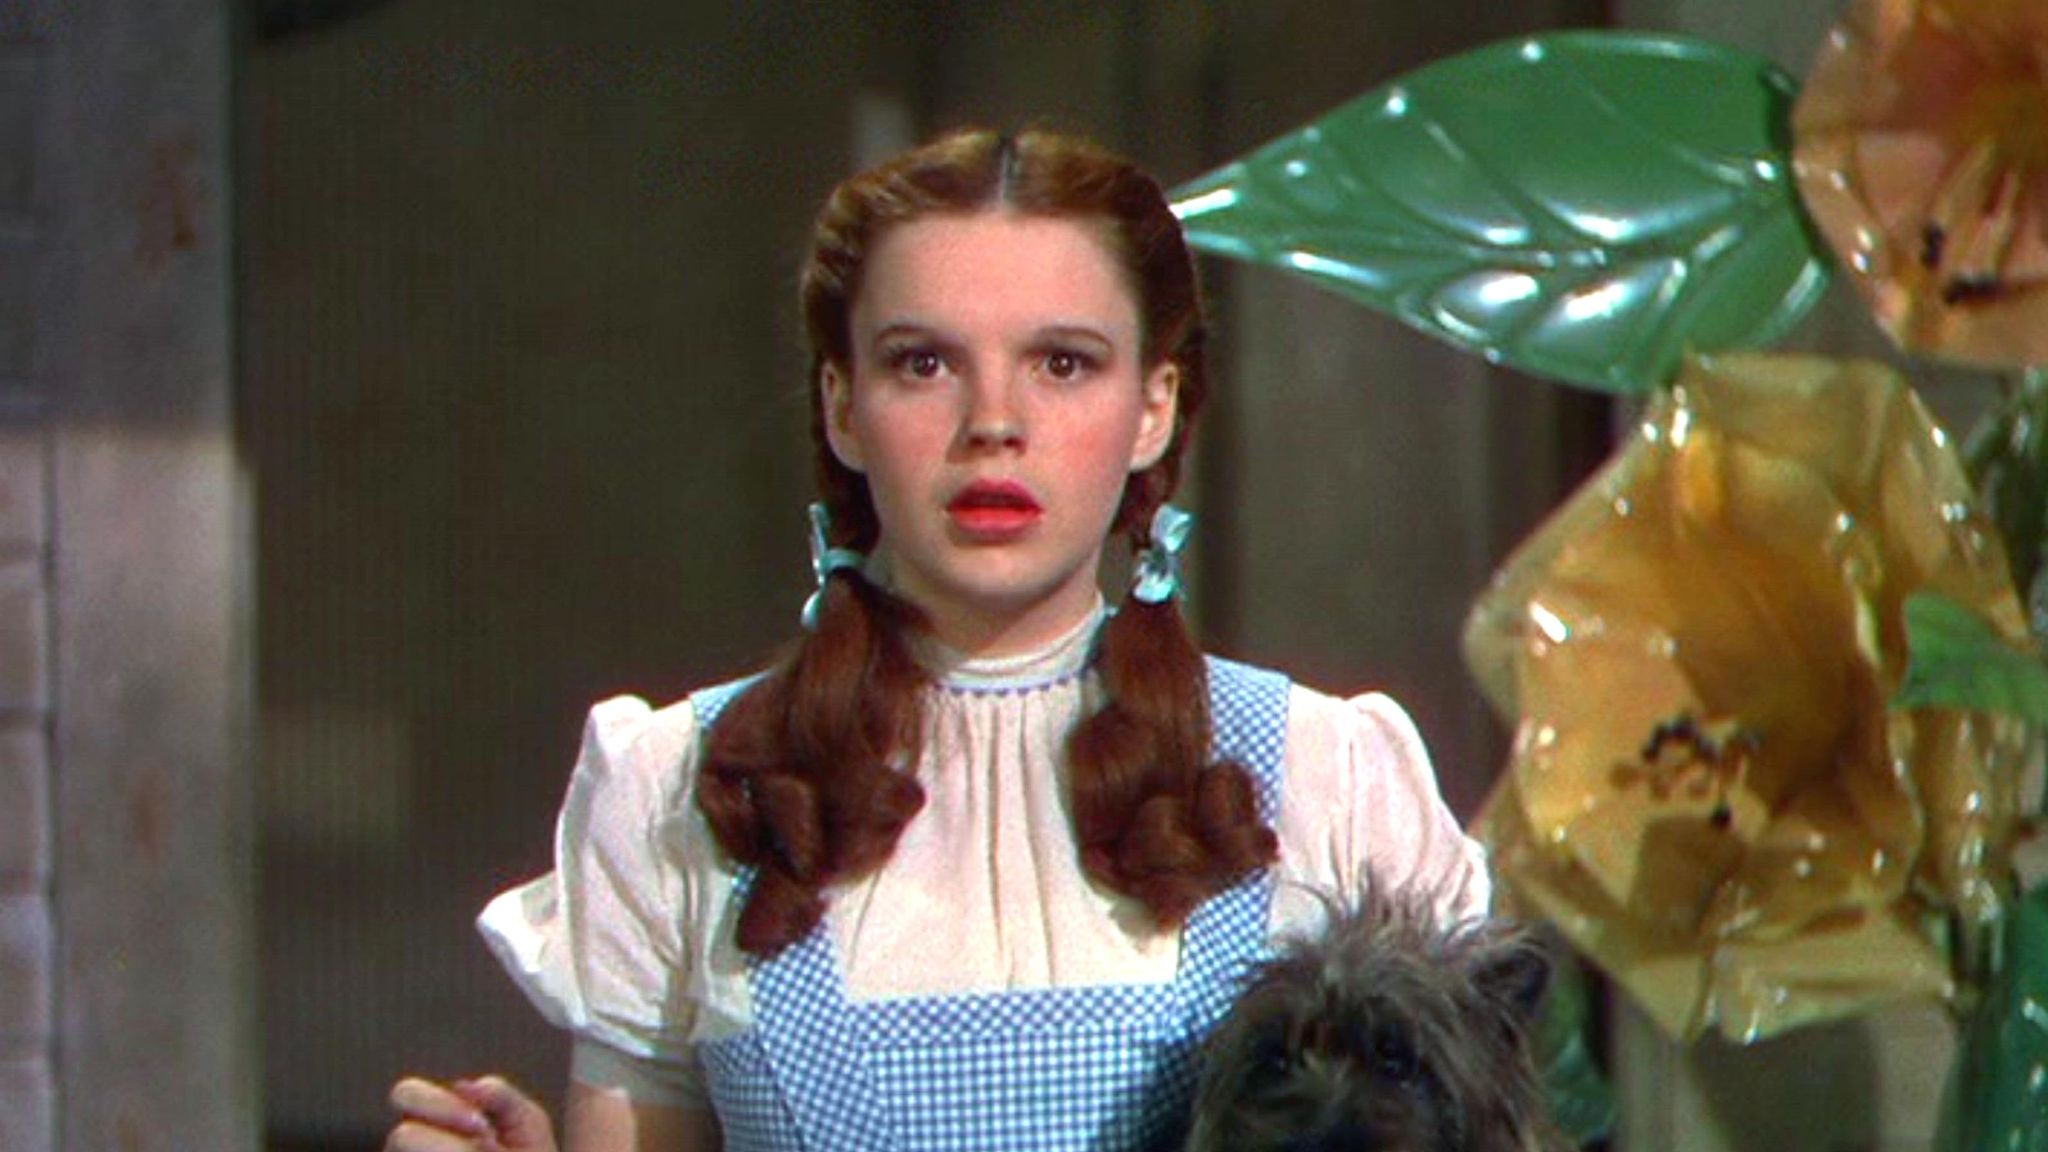 Wizard of Oz' remake planned with 'Watchmen' director Nicole Kassell